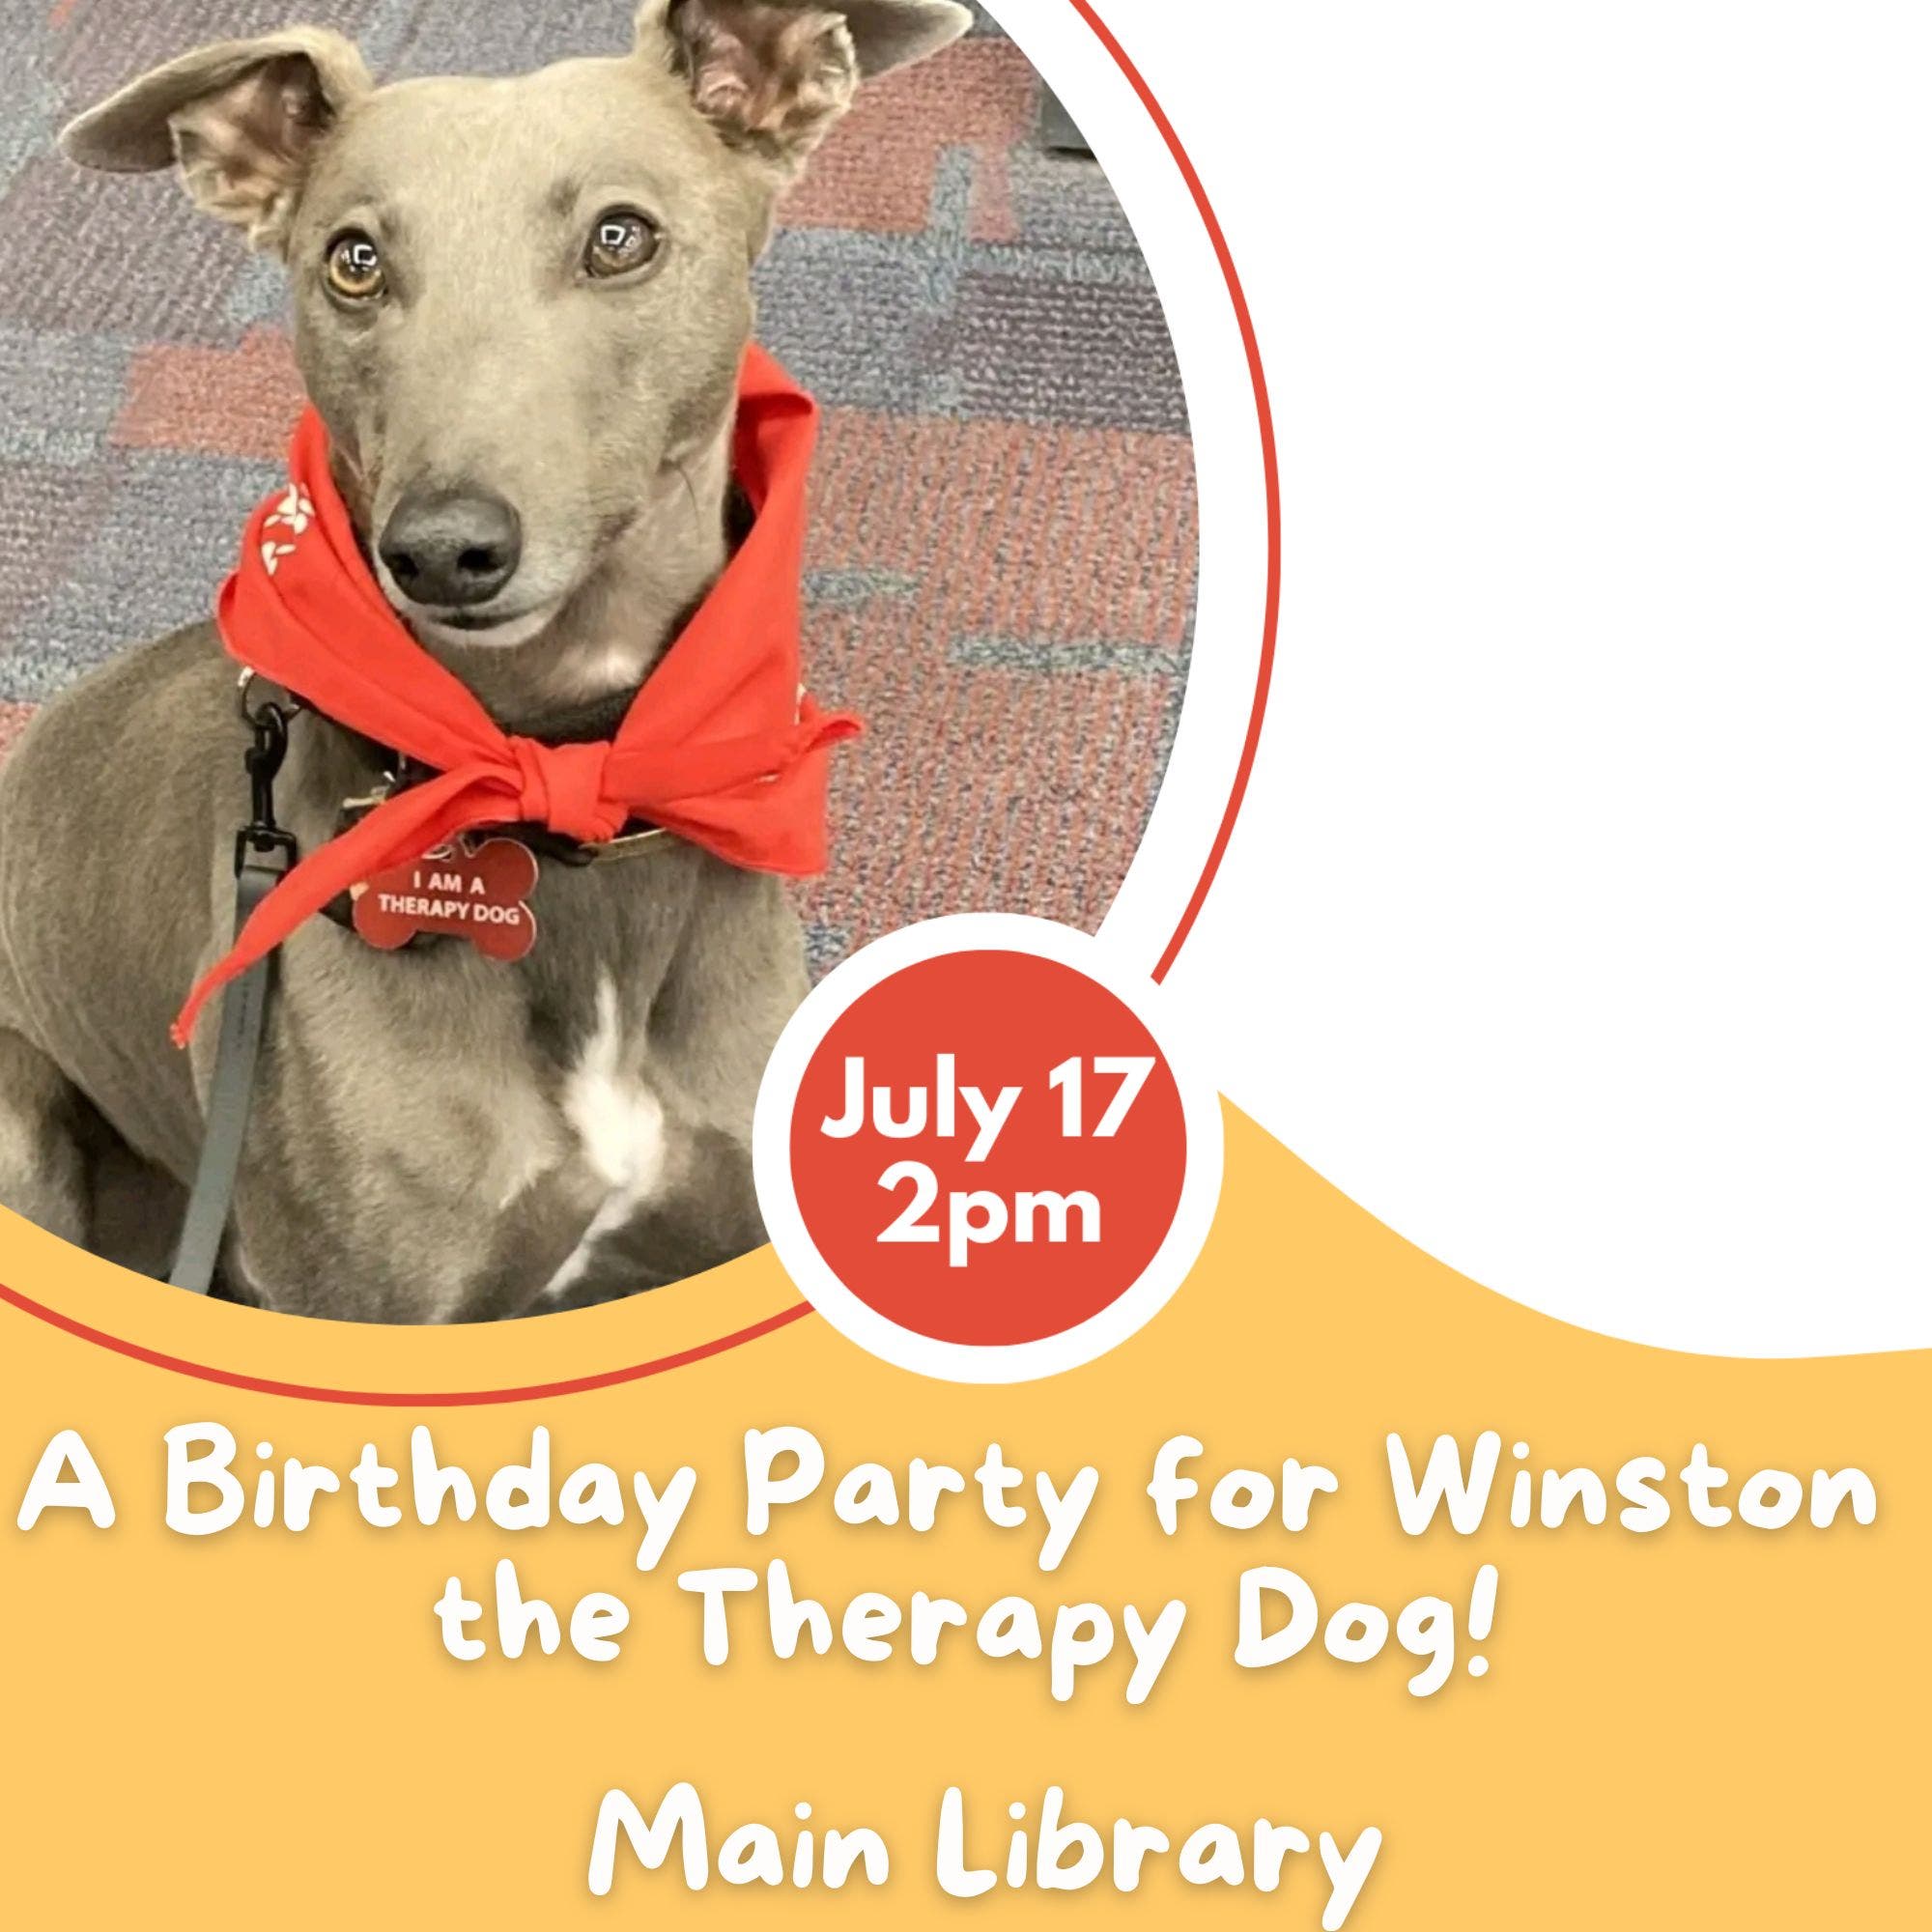 A Birthday Party for Winston the Therapy Dog!